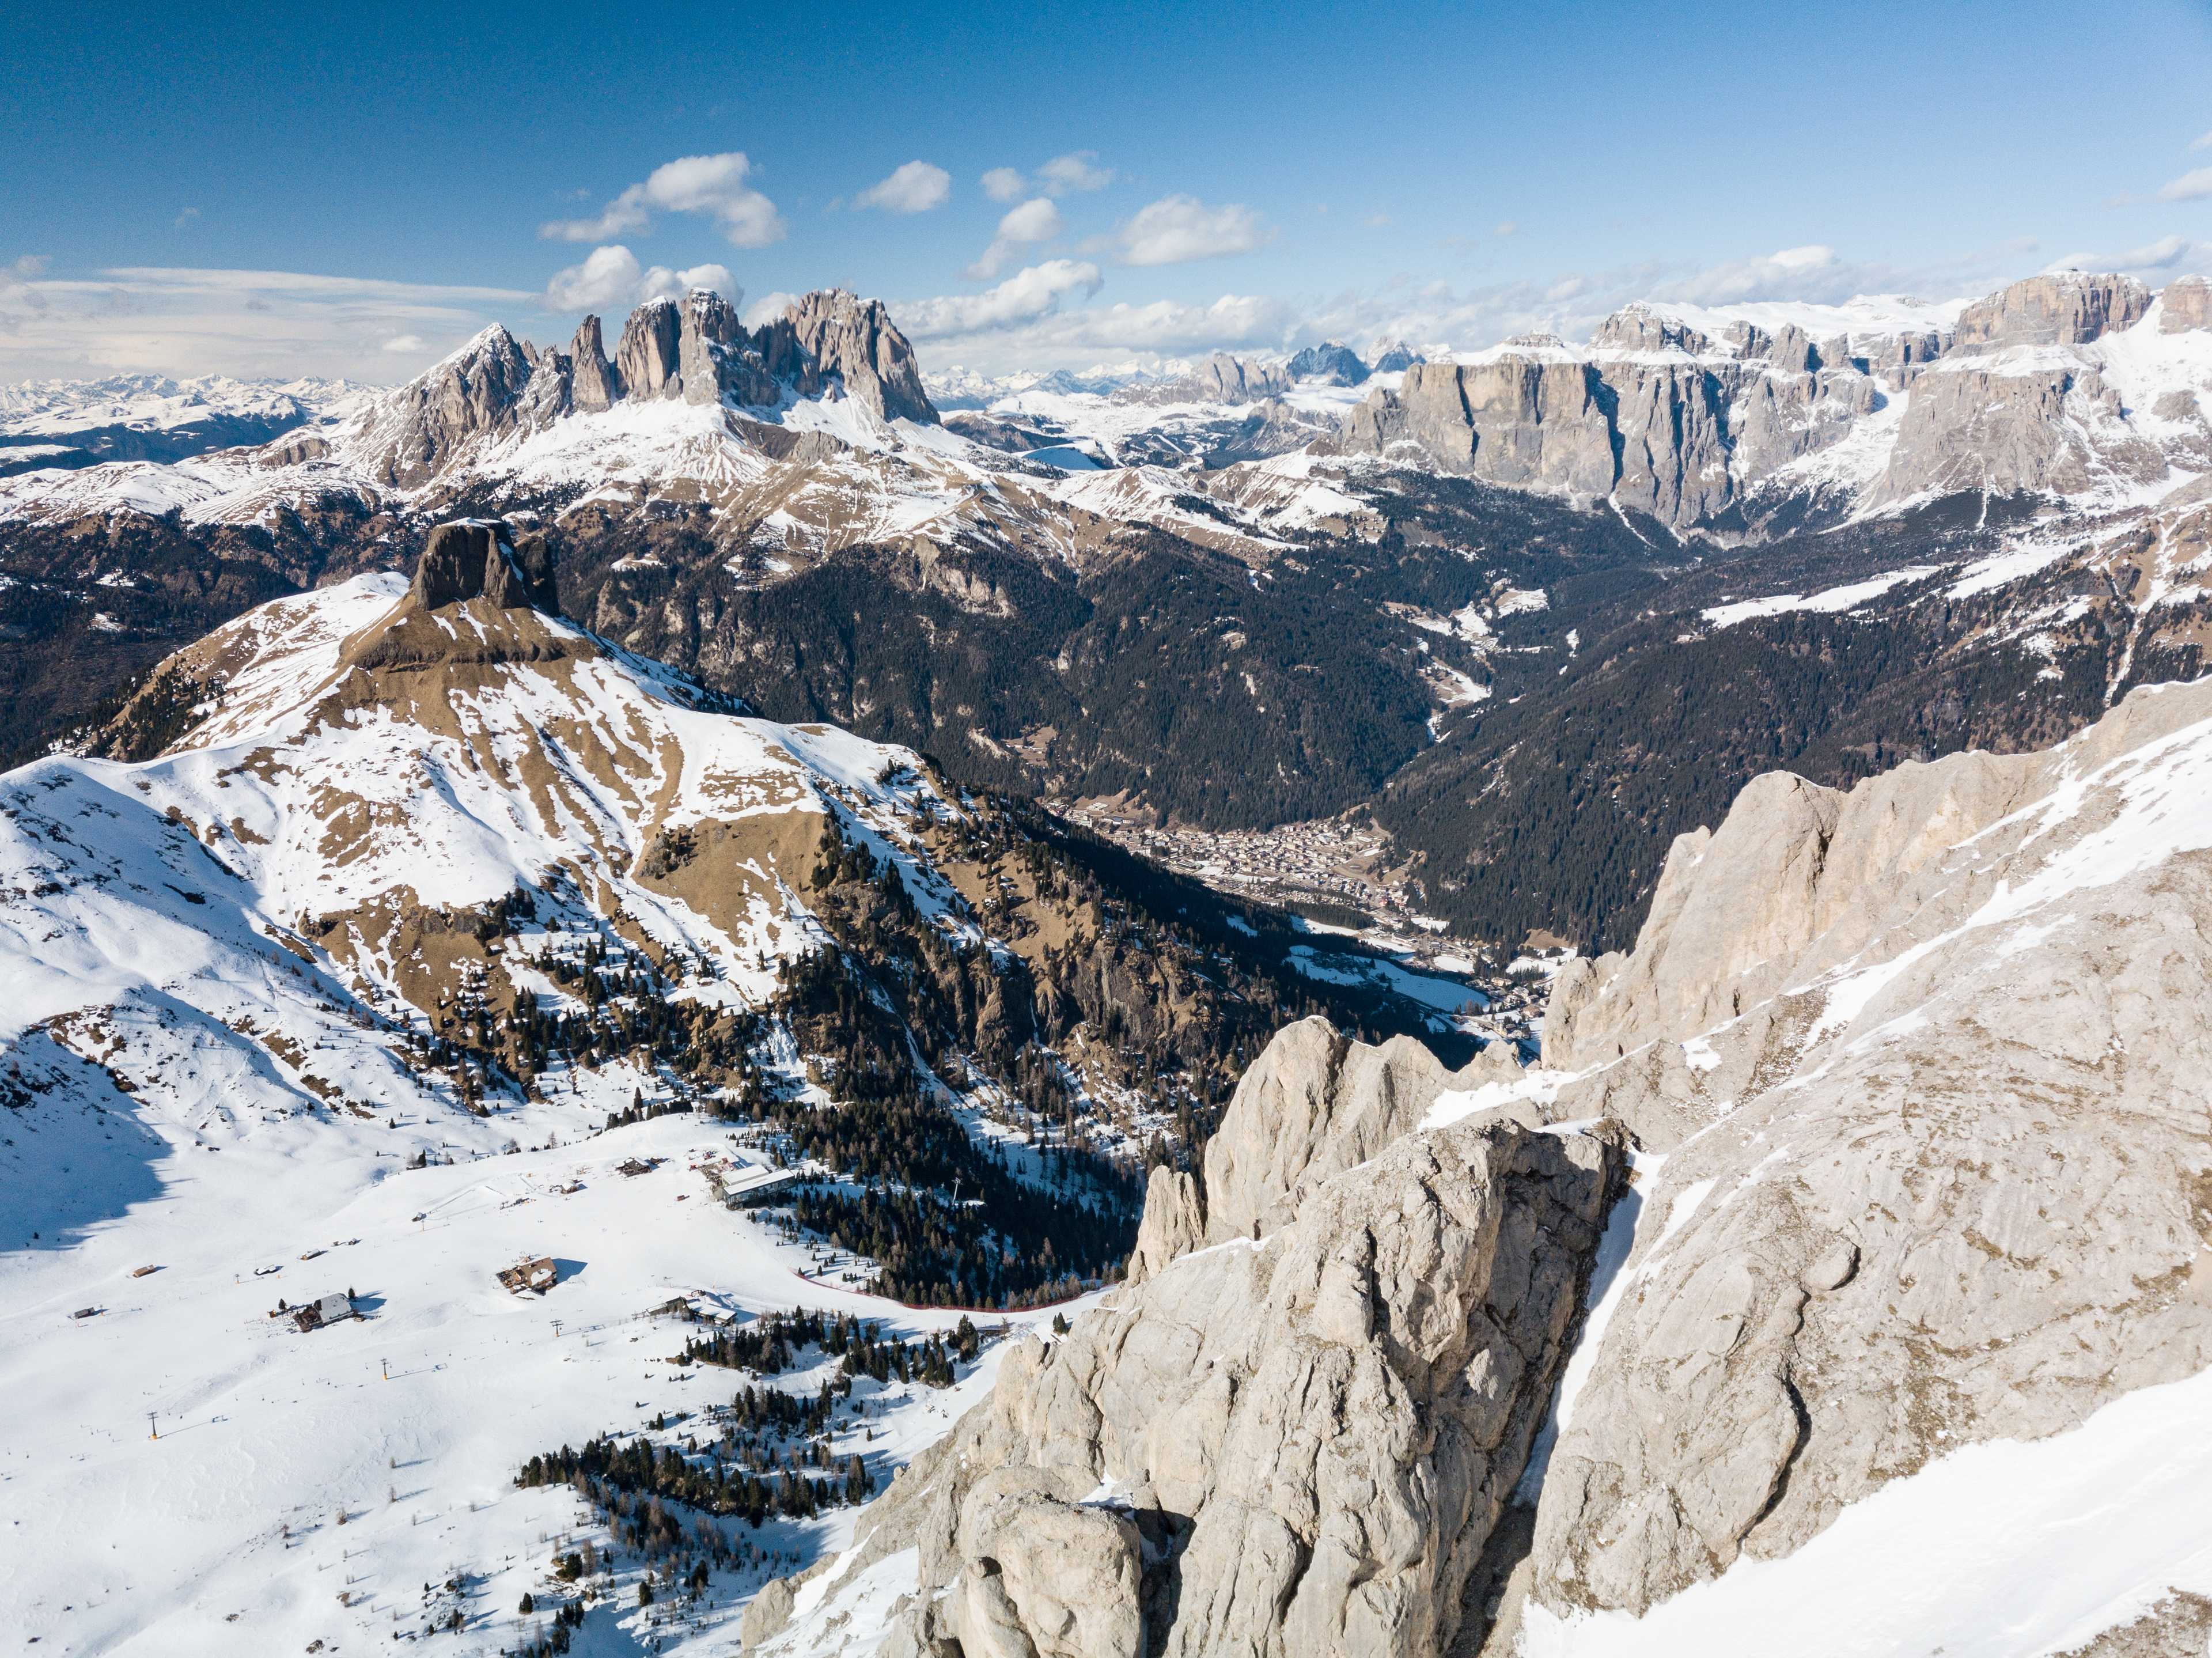 Val di Fassa and the town of Canazei